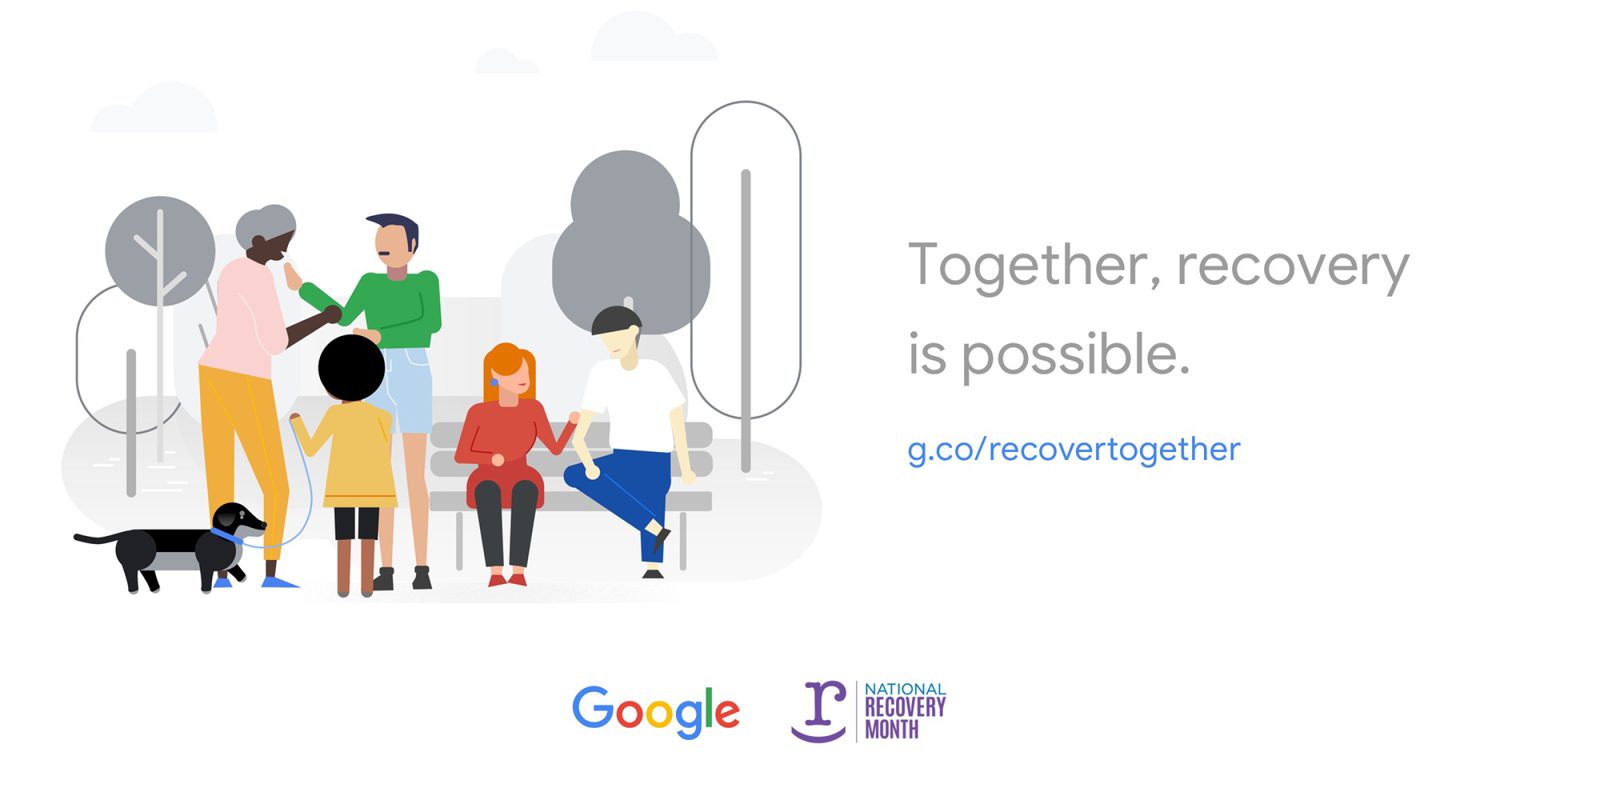 Google Recover Together